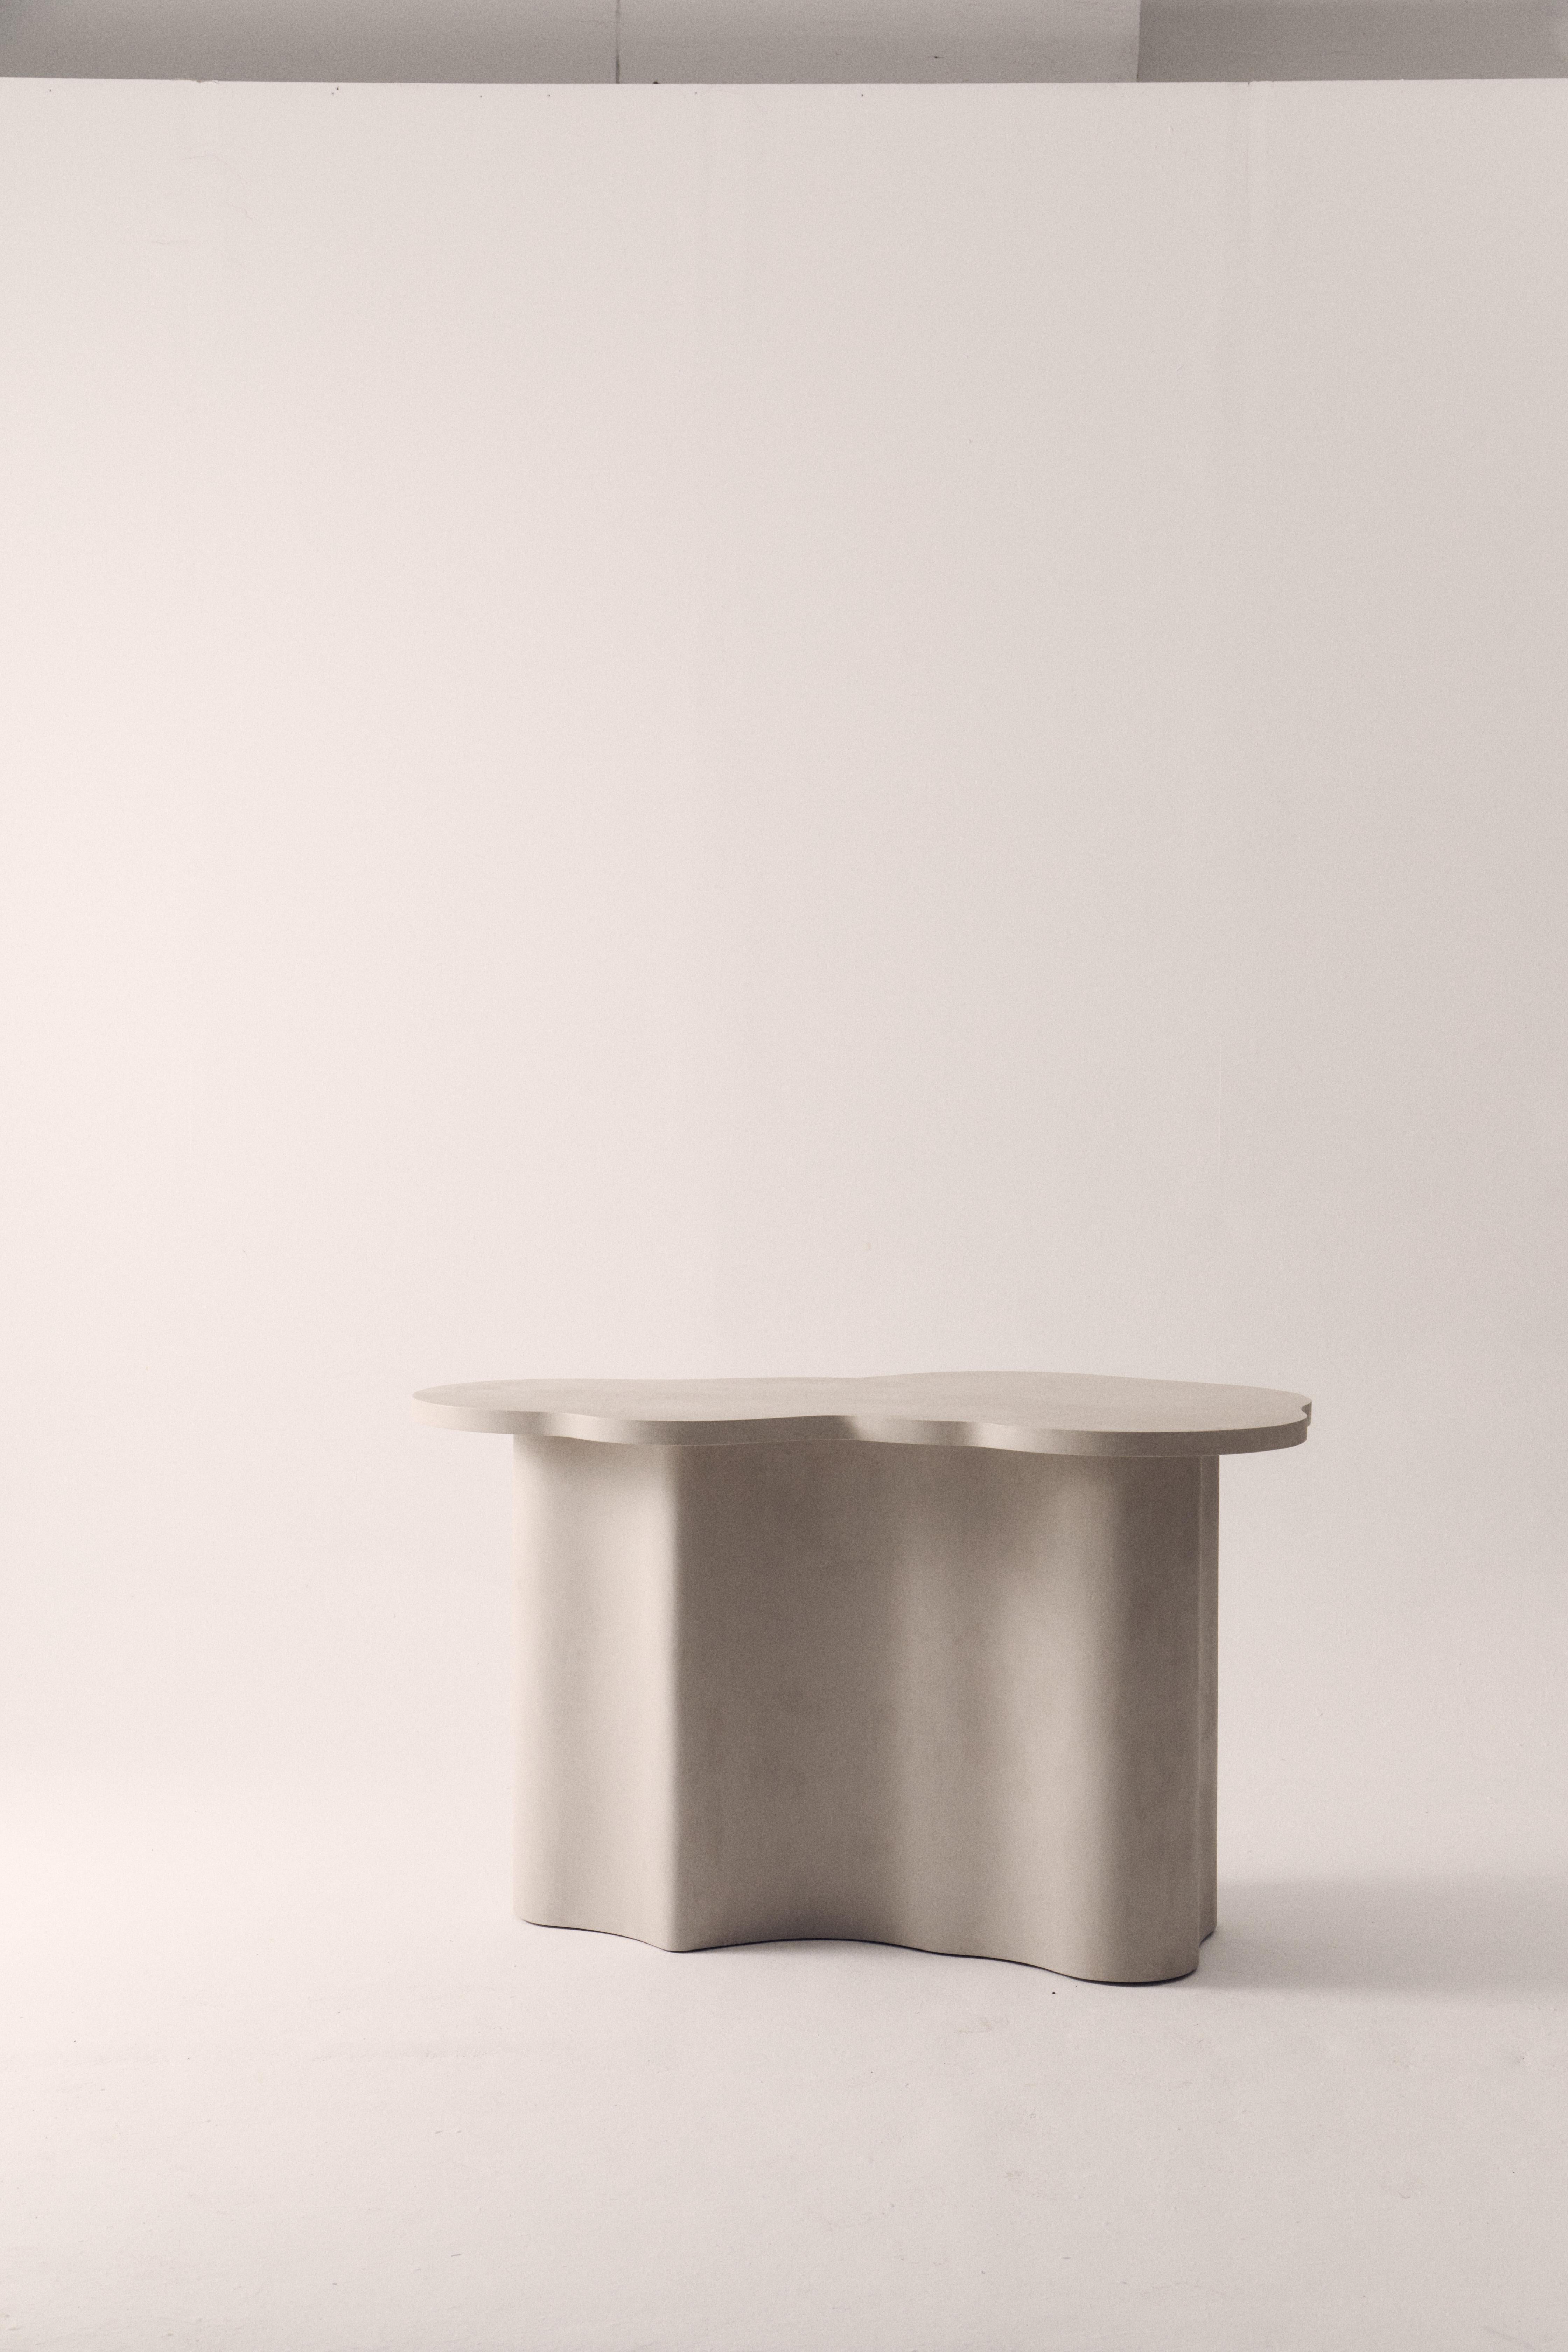 Wave Bar Table by Dawid Konieczny
Dimensions: D 98 x W 150 x H 90 cm. 
Materials: Plaster and MDF.

Different NCS/RAL color options on request. Made in Poland. Please contact us. 

Dawid Konieczny Interiors is a design studio founded in 2021 by